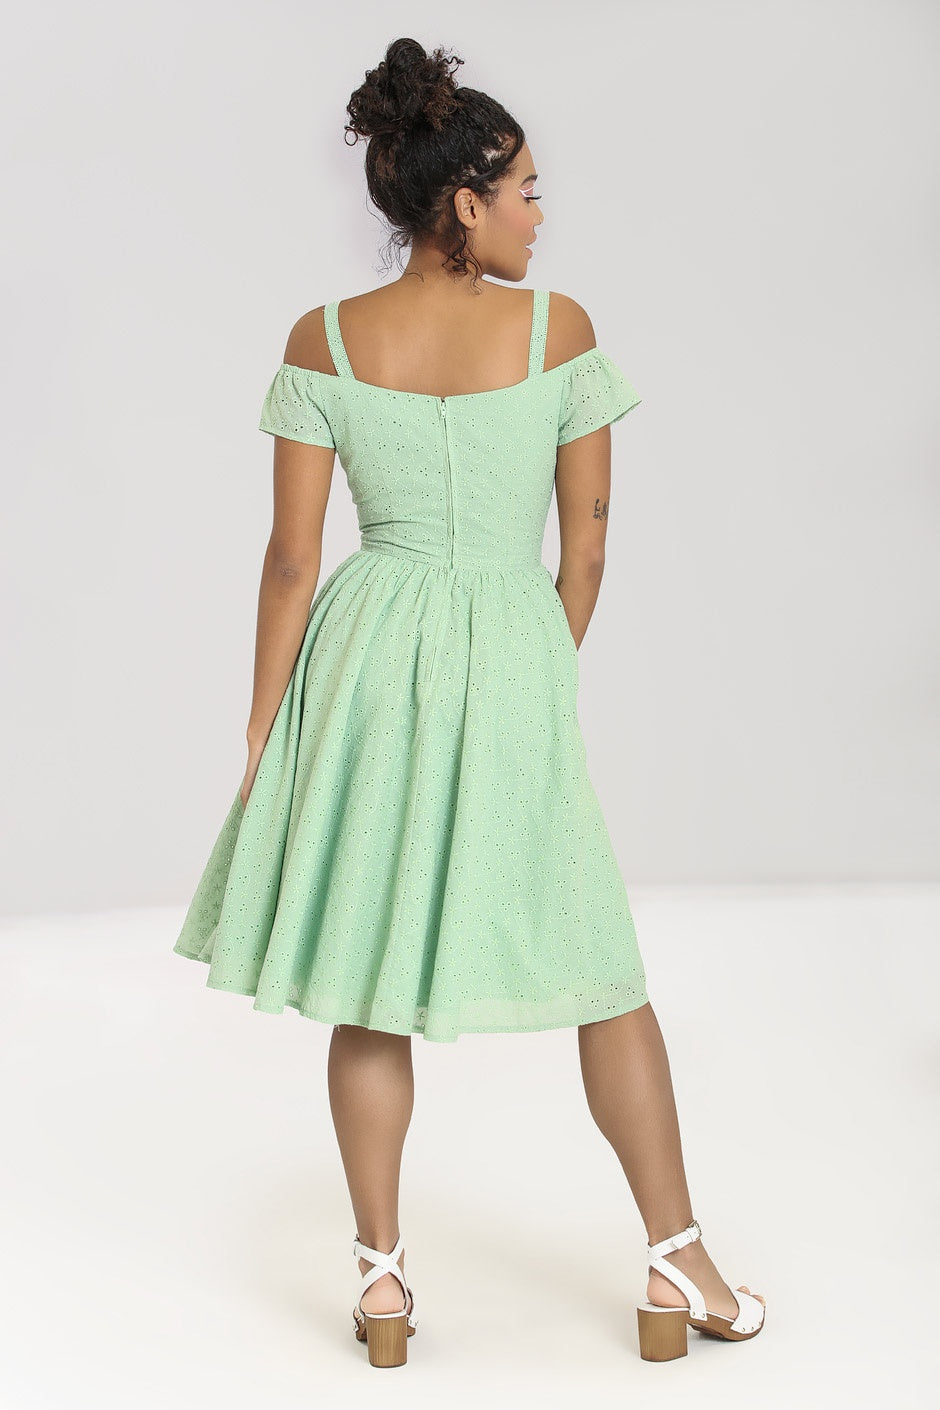 Celia Mint Anglaise Cotton 50s Inspired Gathered Swing Dress